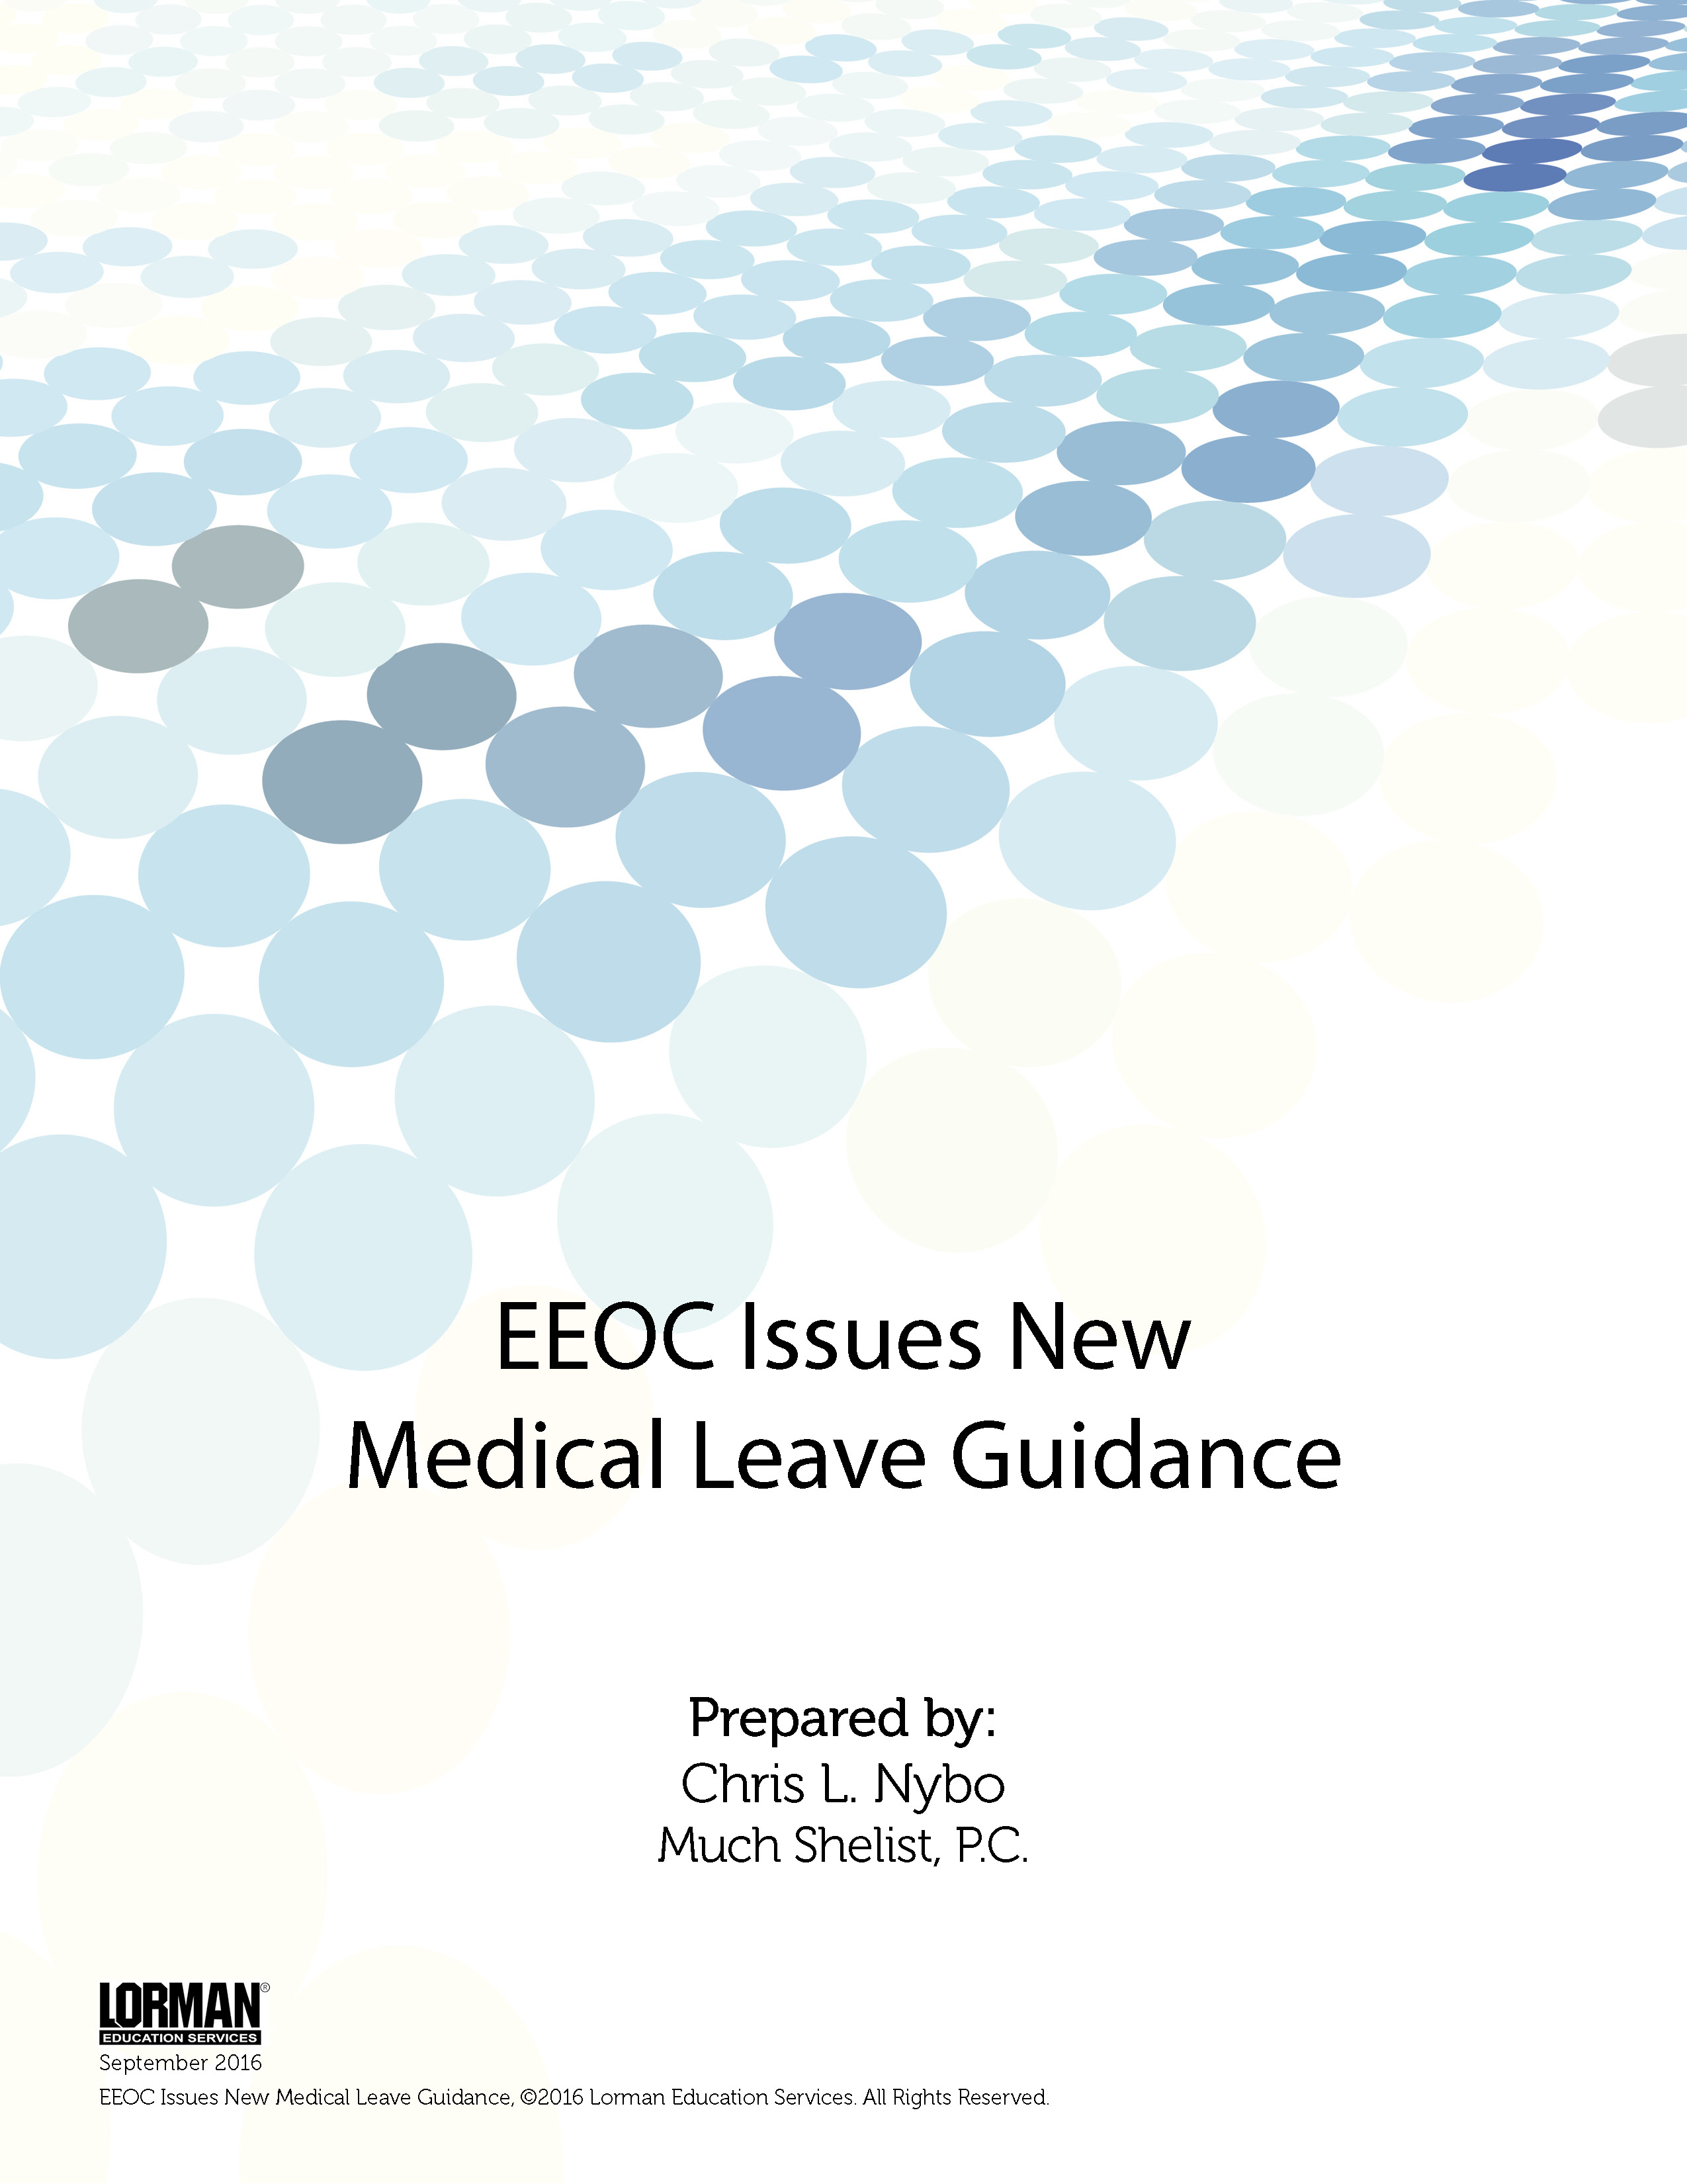 EEOC Issues New Medical Leave Guidance